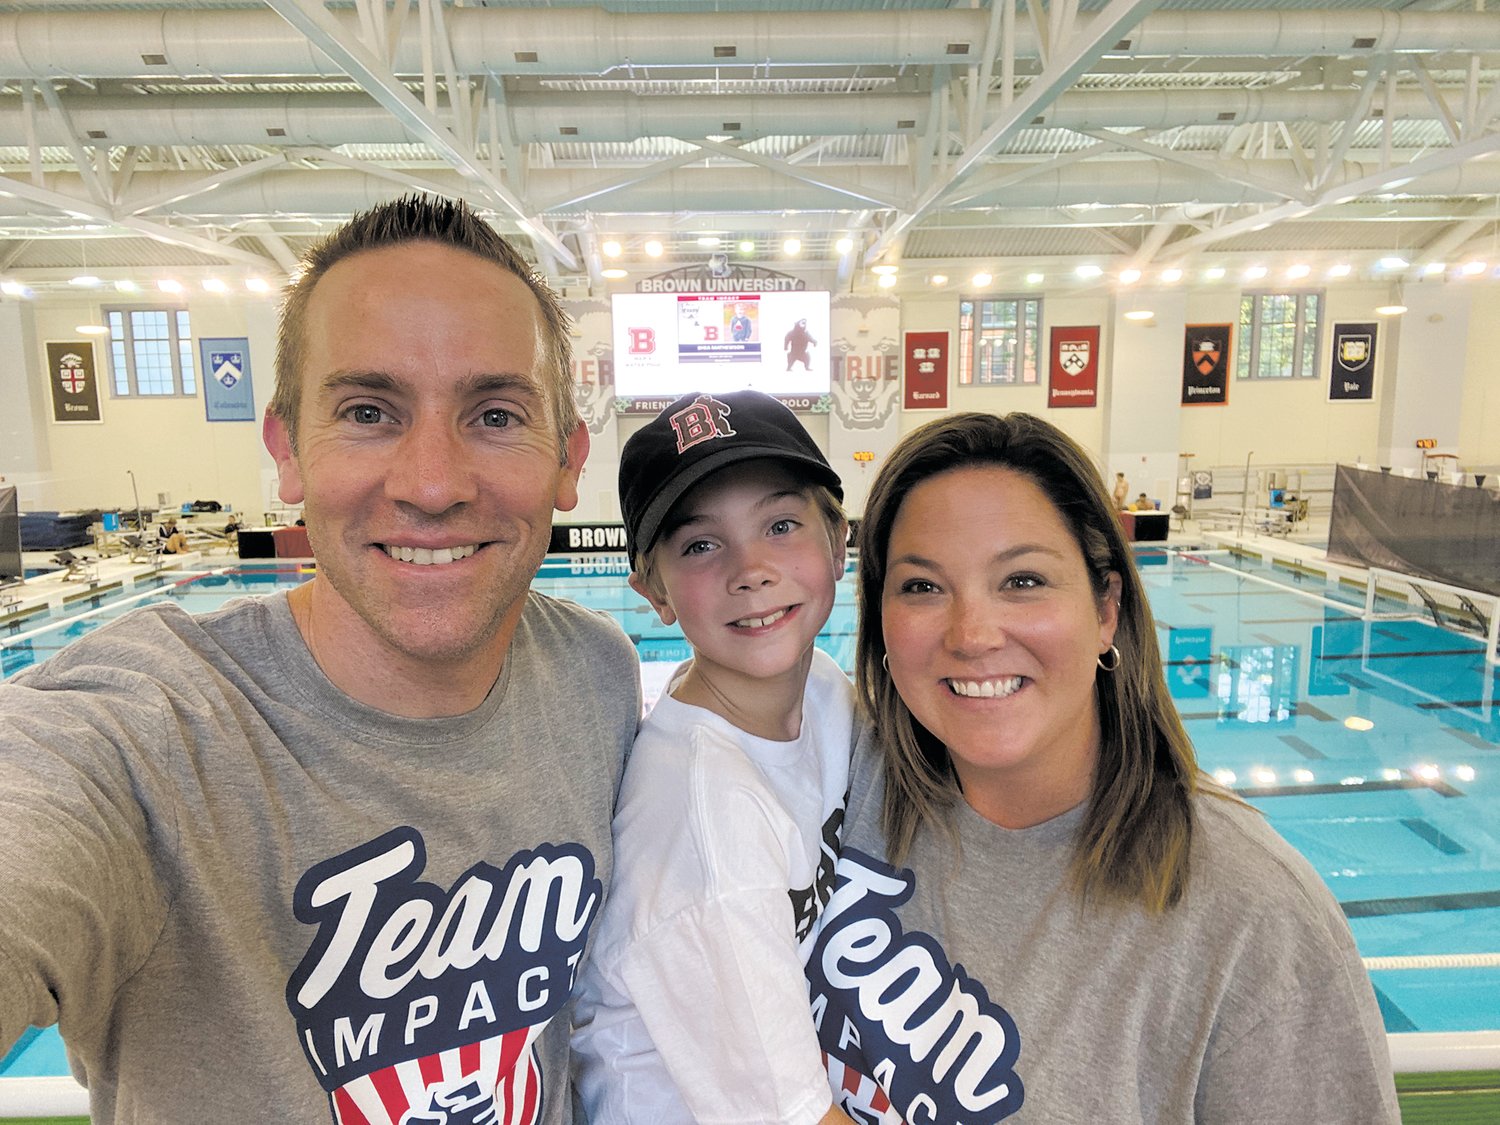 A NEW TEAMMATE: Shea Mathewson with his parents, Jimmy and Jesse, at Brown University in their Team IMPACT shirts. Team IMPACT is a national non-profit organization that matches children facing serious illness and disability with college athletic teams across the country. Shea is a new member of the Men’s Water Polo team.